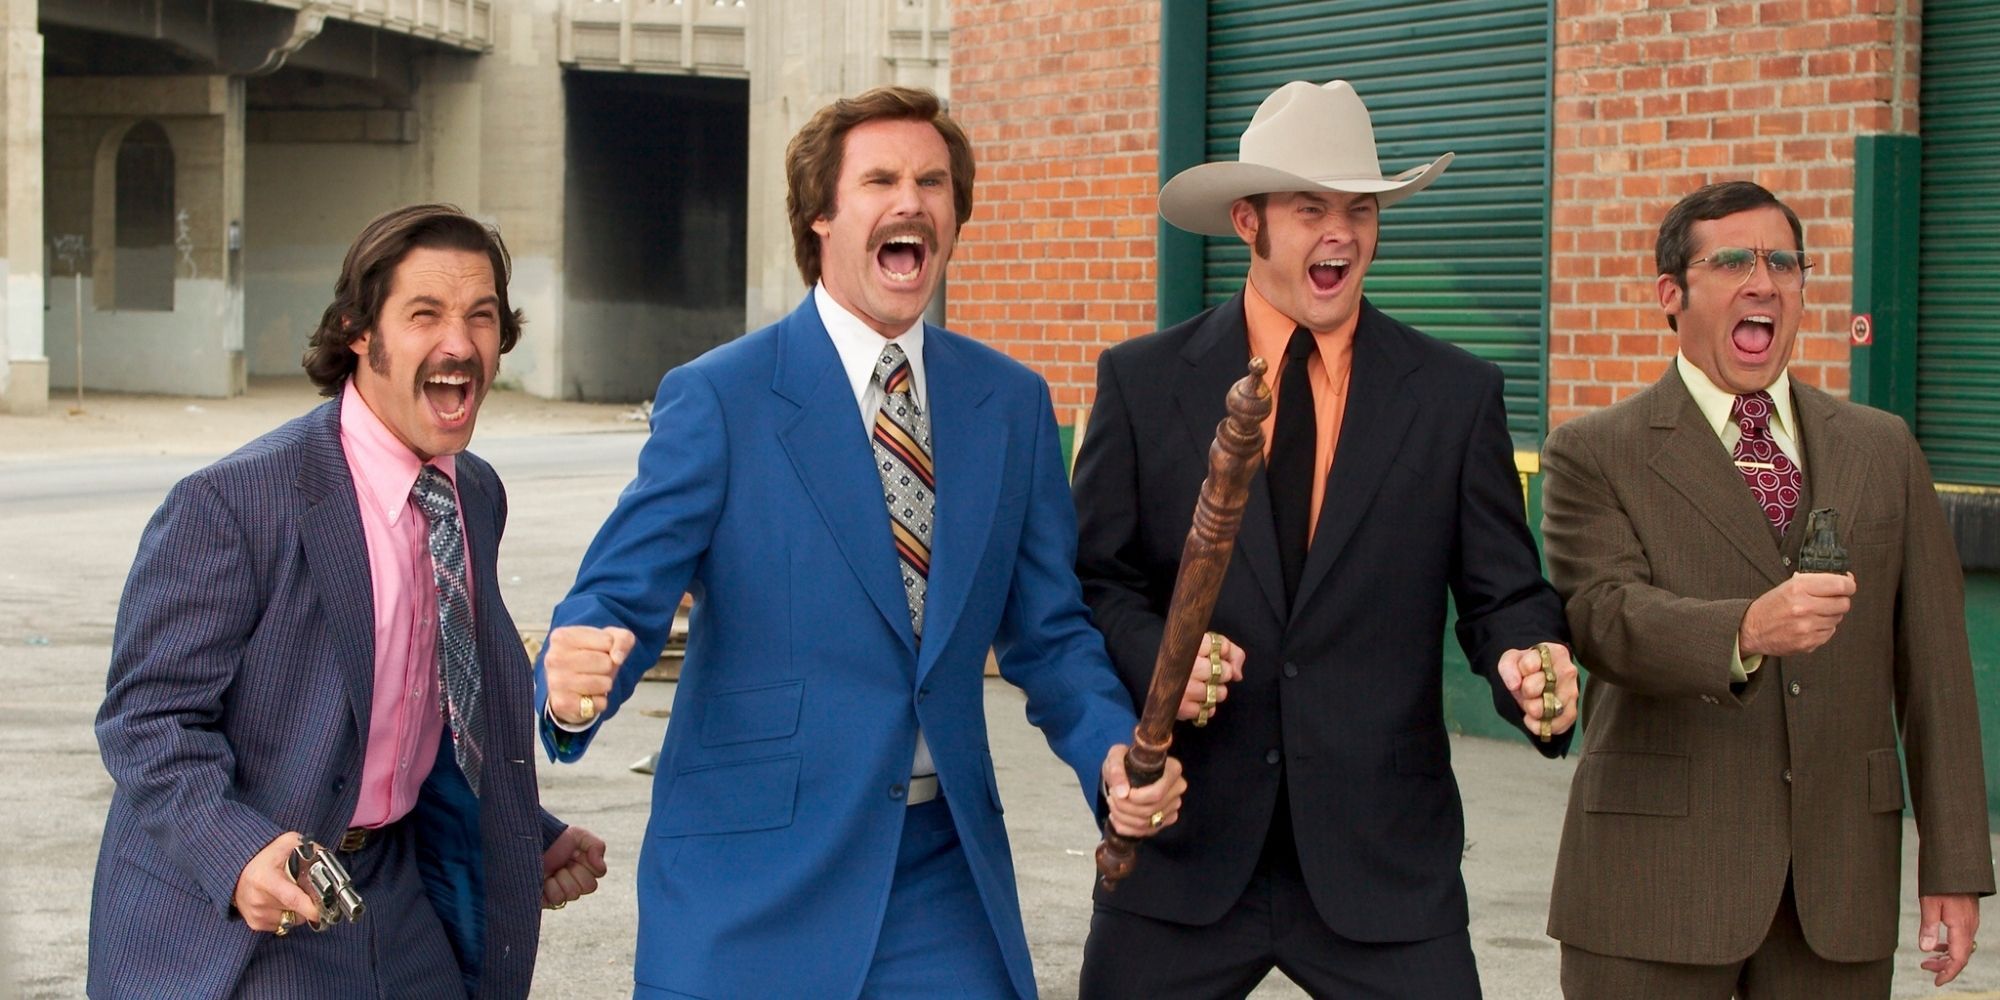 Paul Rudd as Brian Fantana, Will Ferrell as Ron Burgundy, David Koechner as Champ Kind, and Steve Carell as Brick Tamland in Anchorman: The Legend of Ron Burgundy